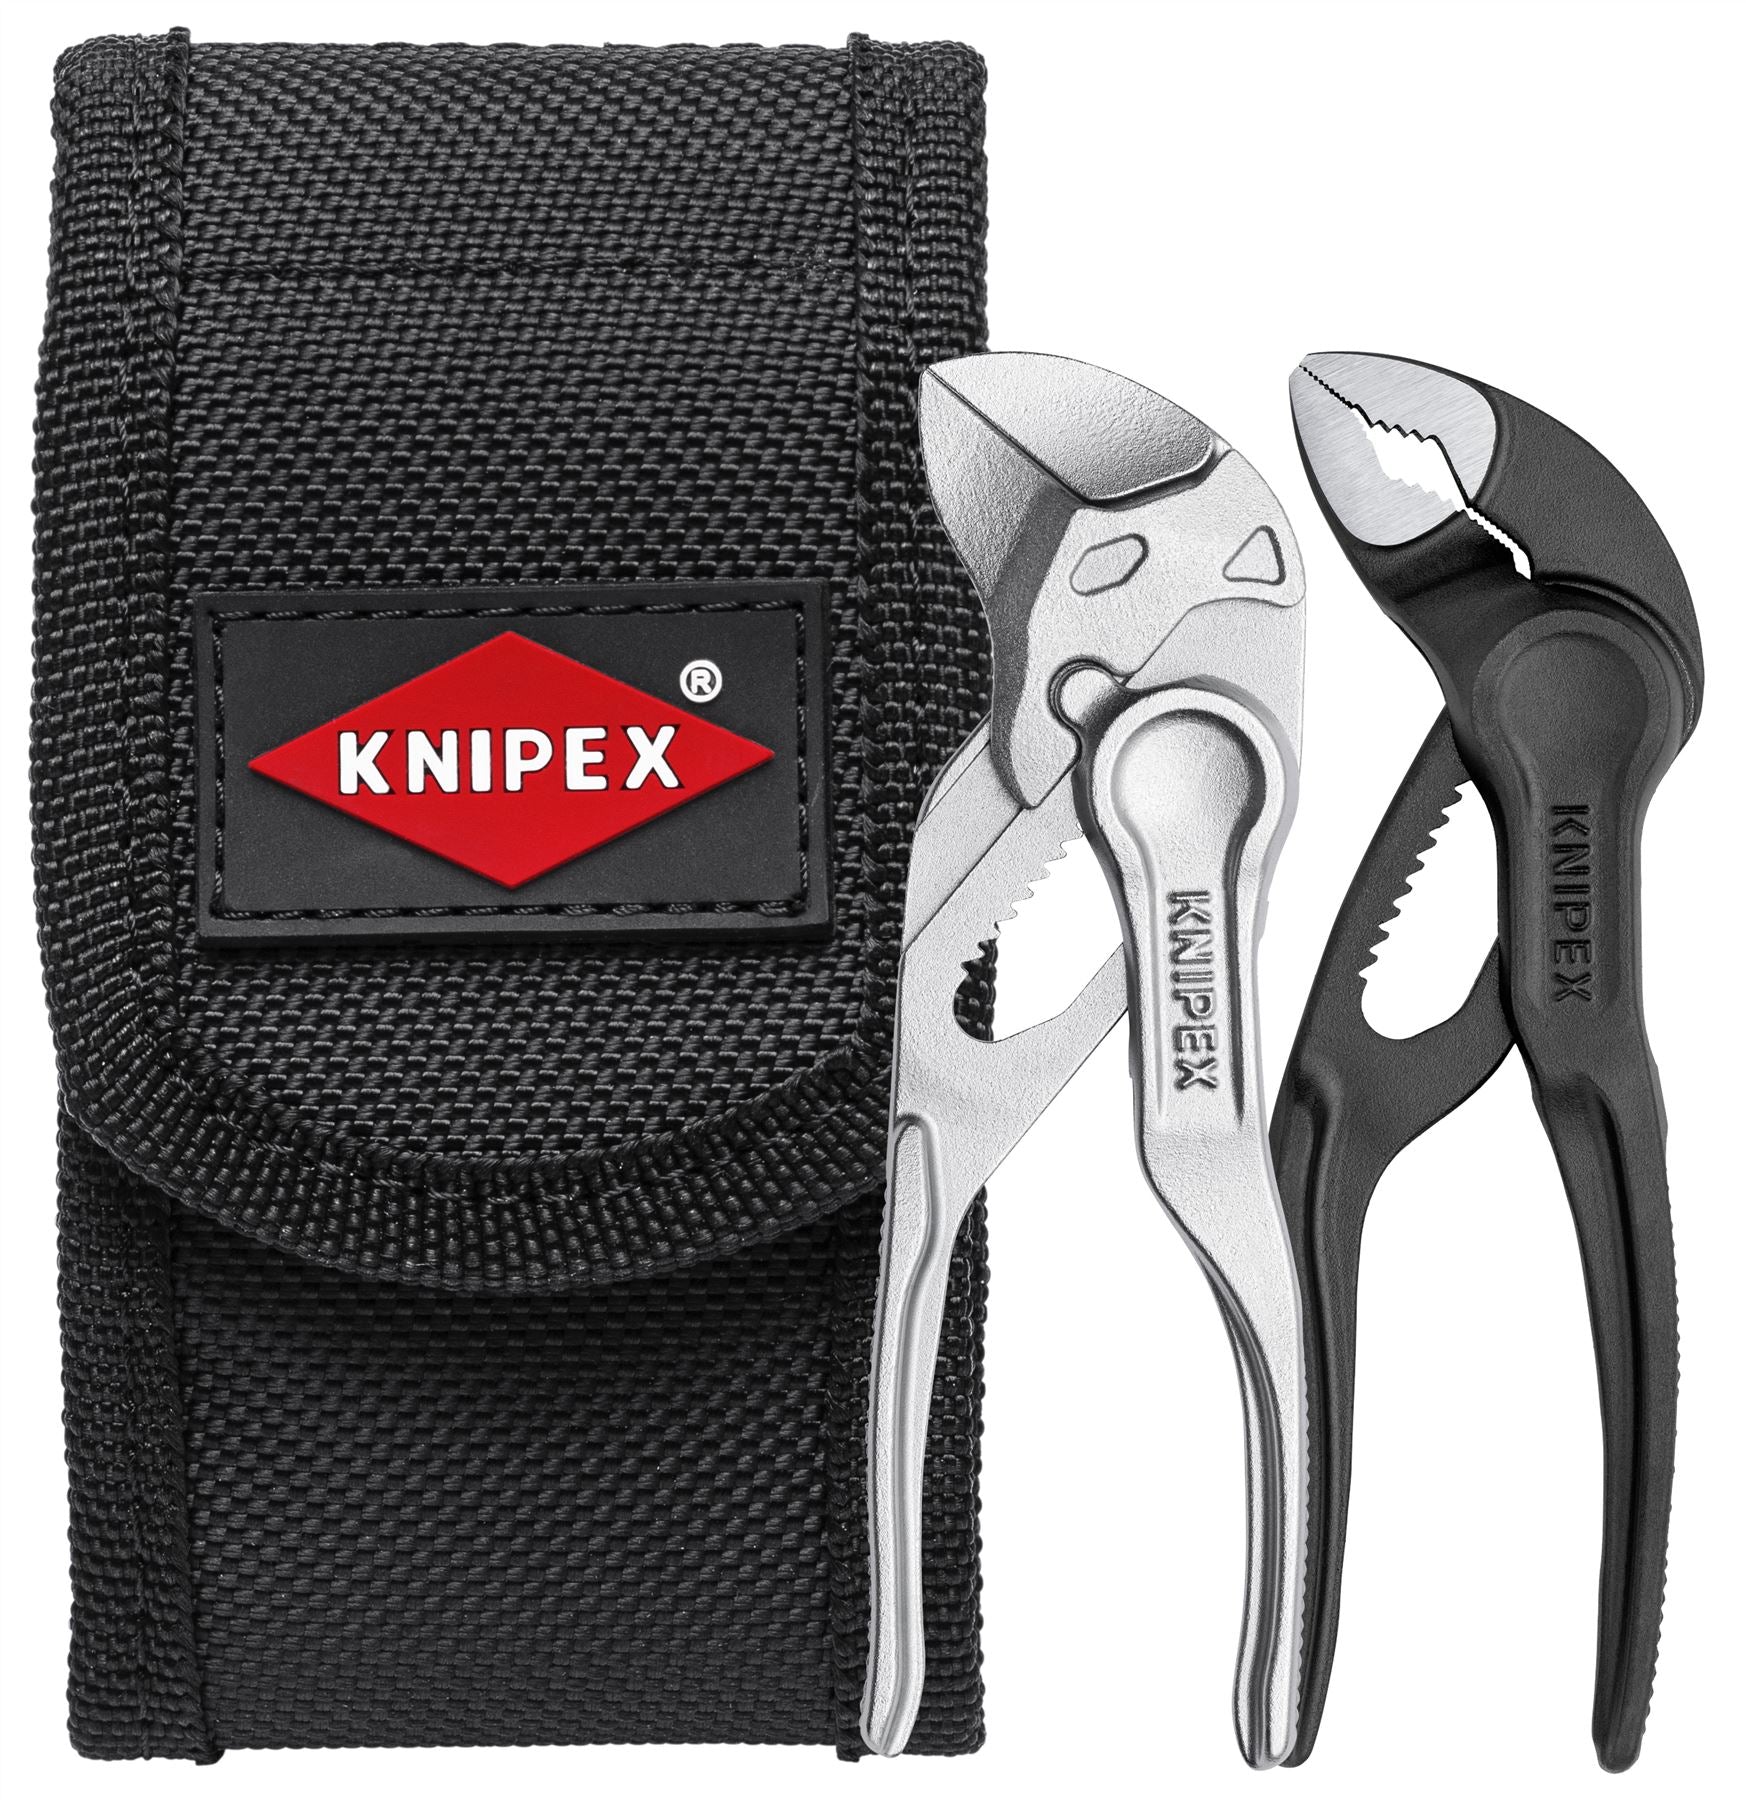 Knipex Mini Pliers Set XS in Belt Tool Pouch 100mm Cobra Water Pump Pliers 100mm Wrench 00 20 72 V04 XS